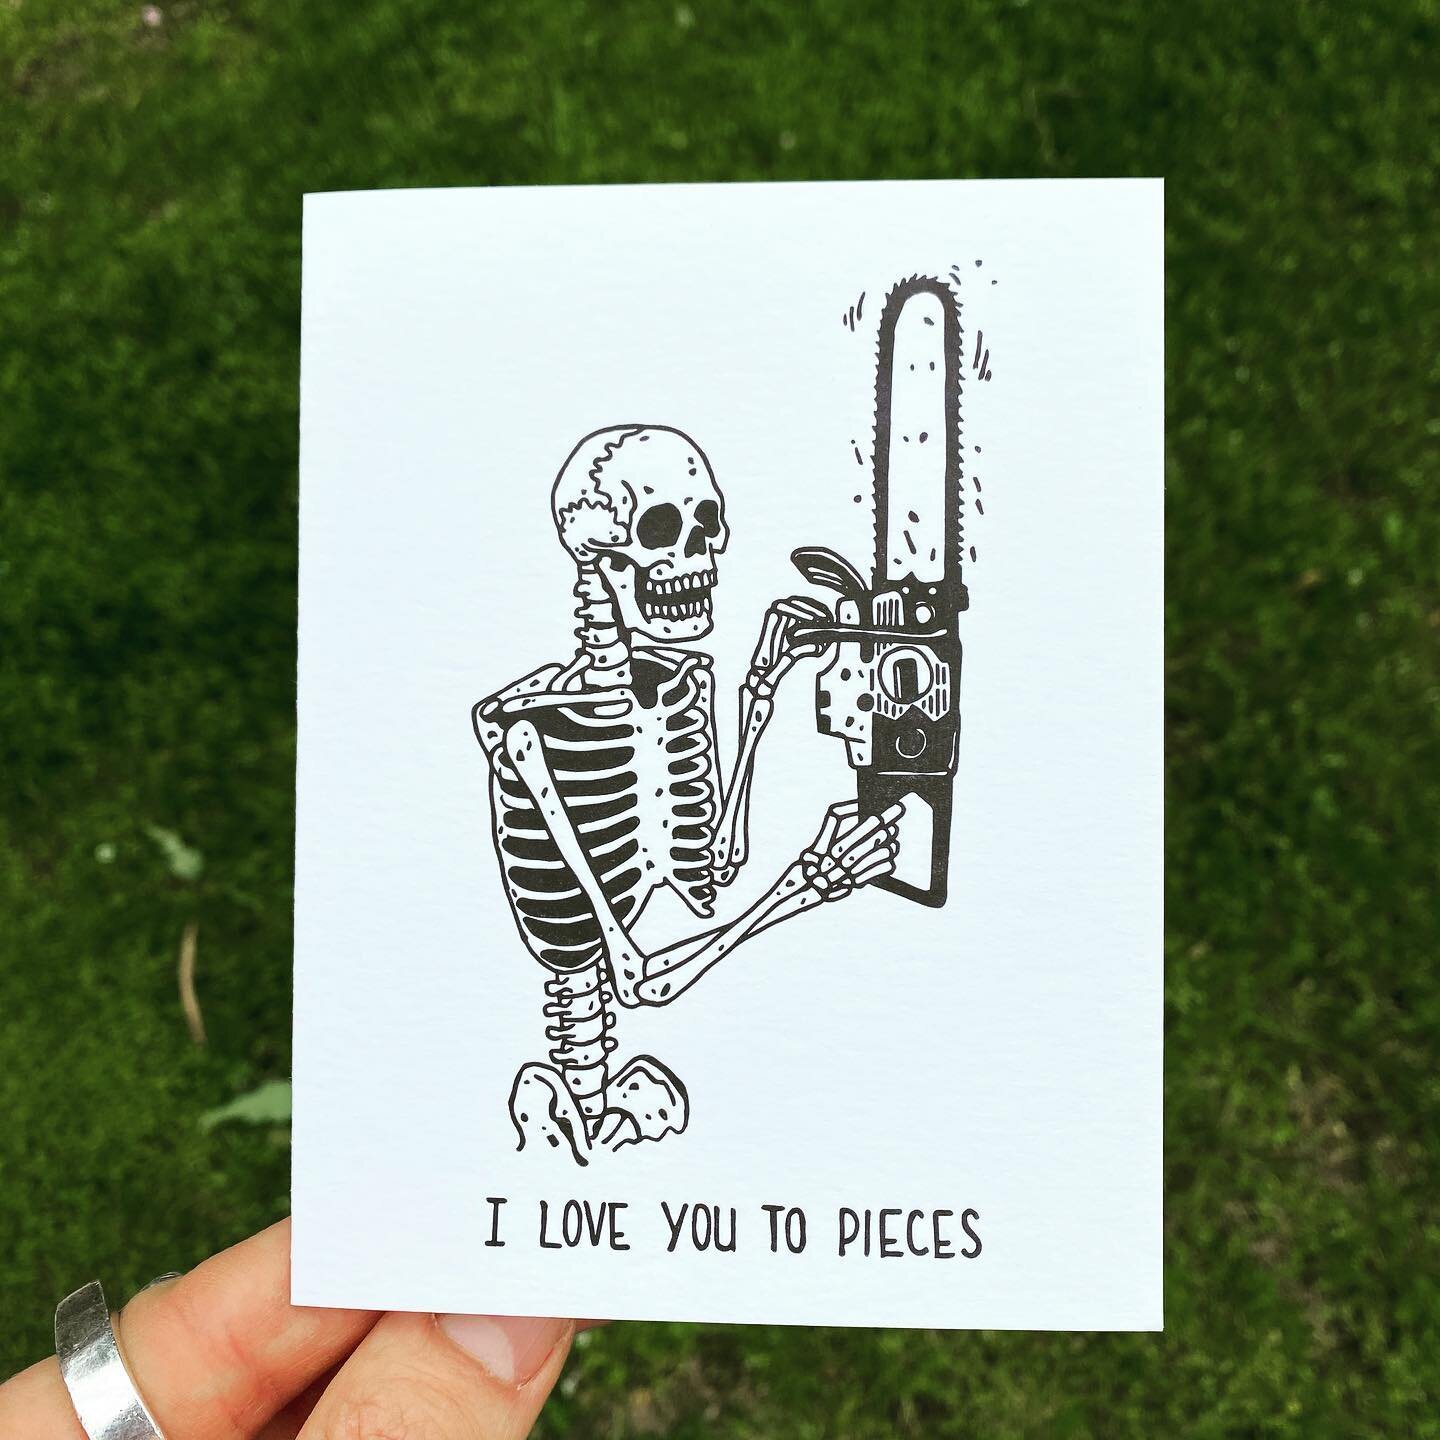 These cards turned out so good!
Selling fast! Only 20 made and half are already gone!😯
.
.
.
#limited #beebosloth #letterpress #printing #letterpressprint #chainsaw #fun #illustration #valentines #greetingcard #skeleton #lowbrow